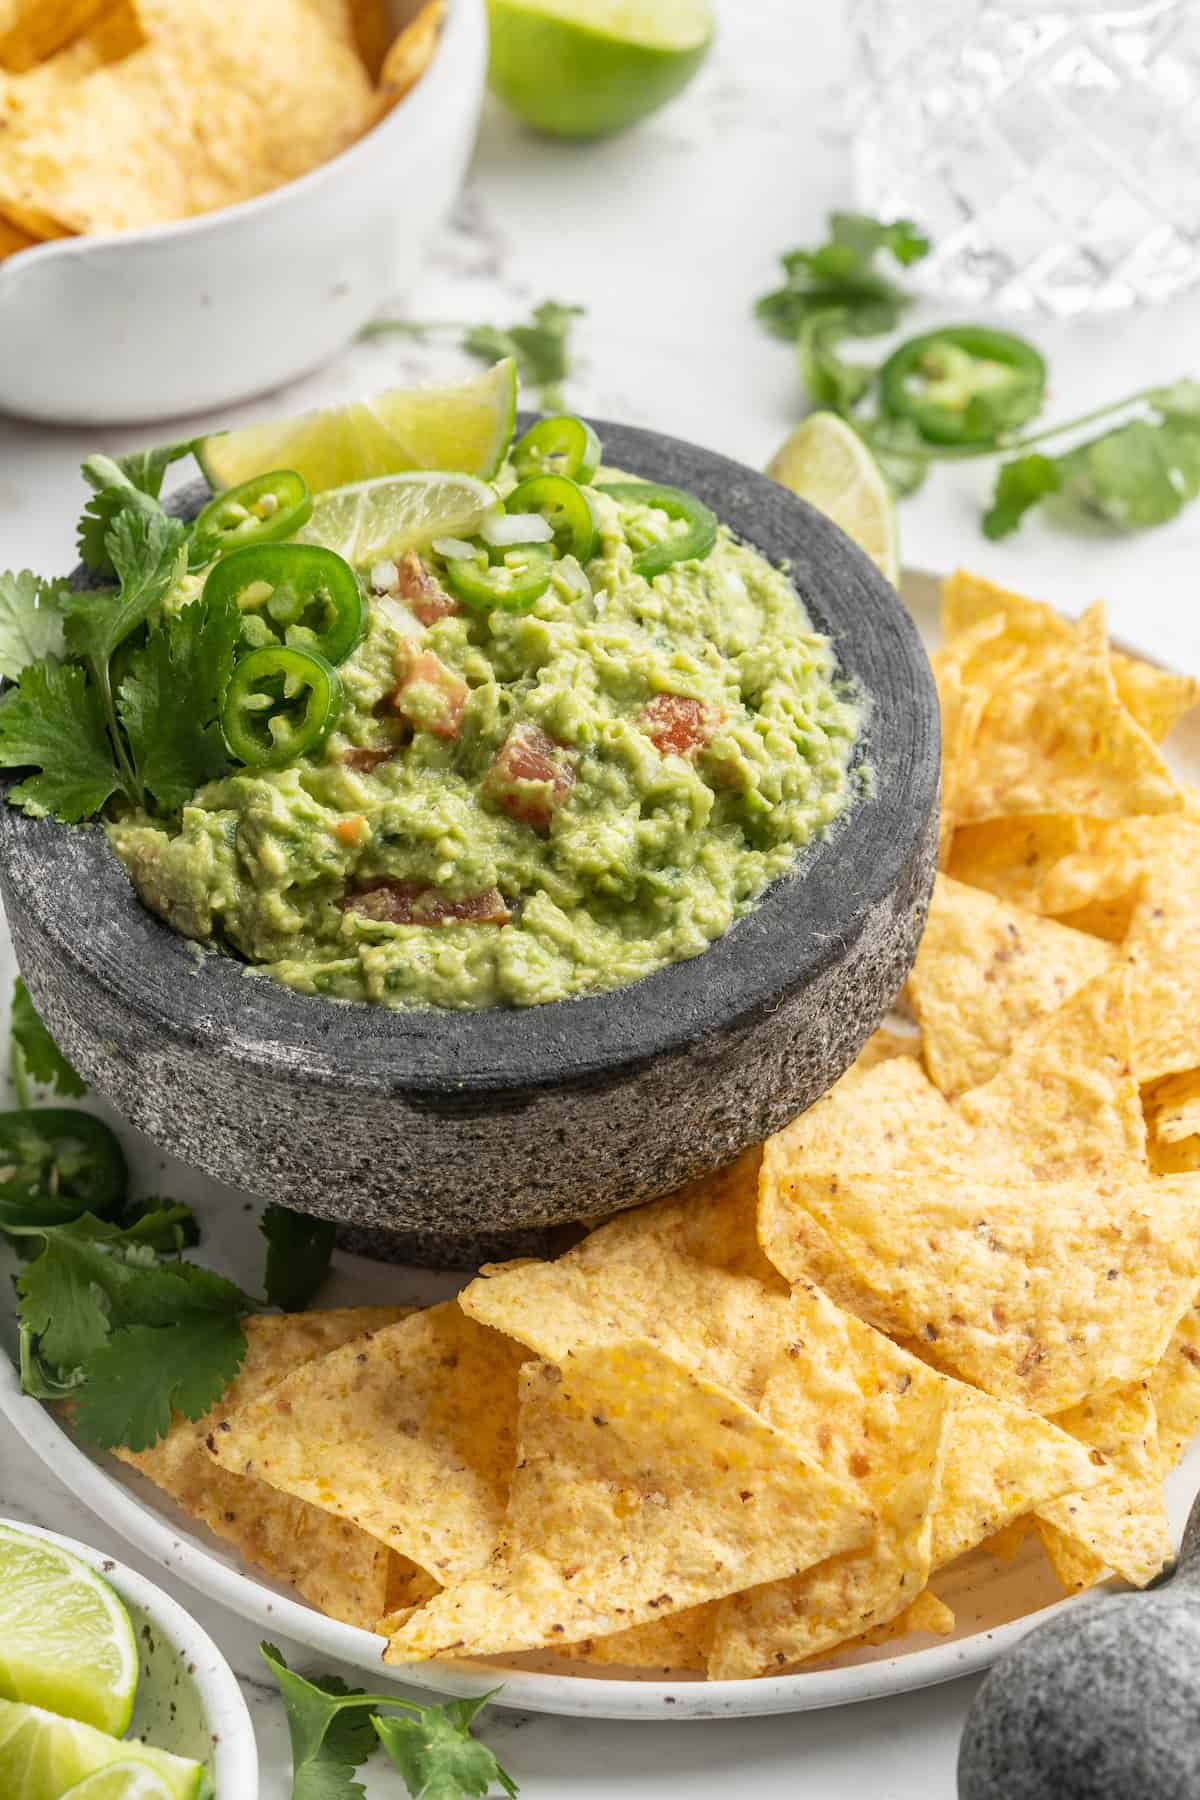 Molcajete with guacamole on plate with tortilla chips